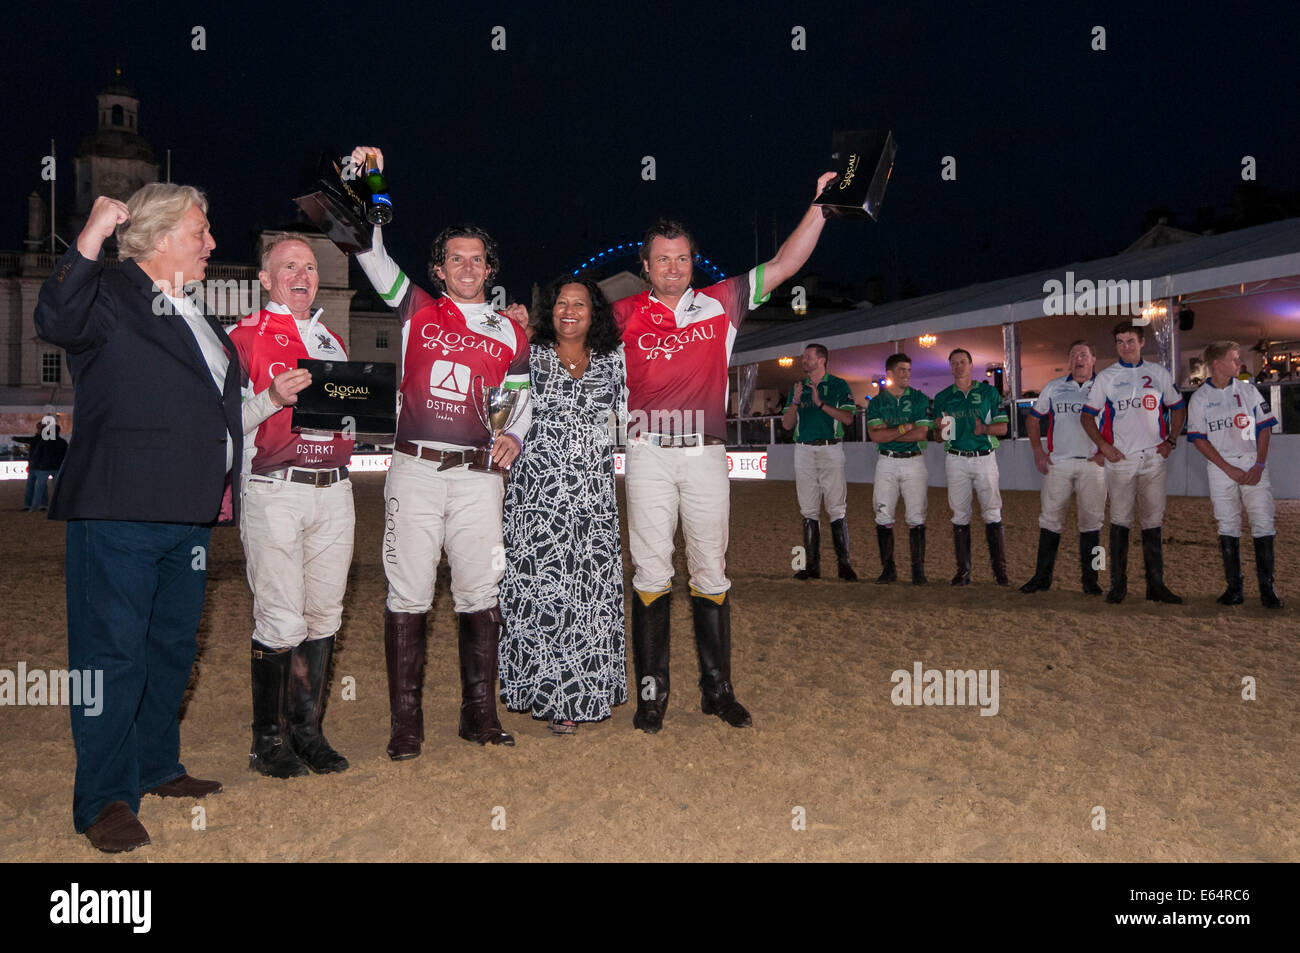 London, UK, 14 August 2014.  The famous Horse Guards Parade hosts City Polo, an inaugural evening of international arena polo.  Pictured : Team Wales receive their winner's trophy from designer, David Emanuel.   Credit:  Stephen Chung/Alamy Live News Stock Photo